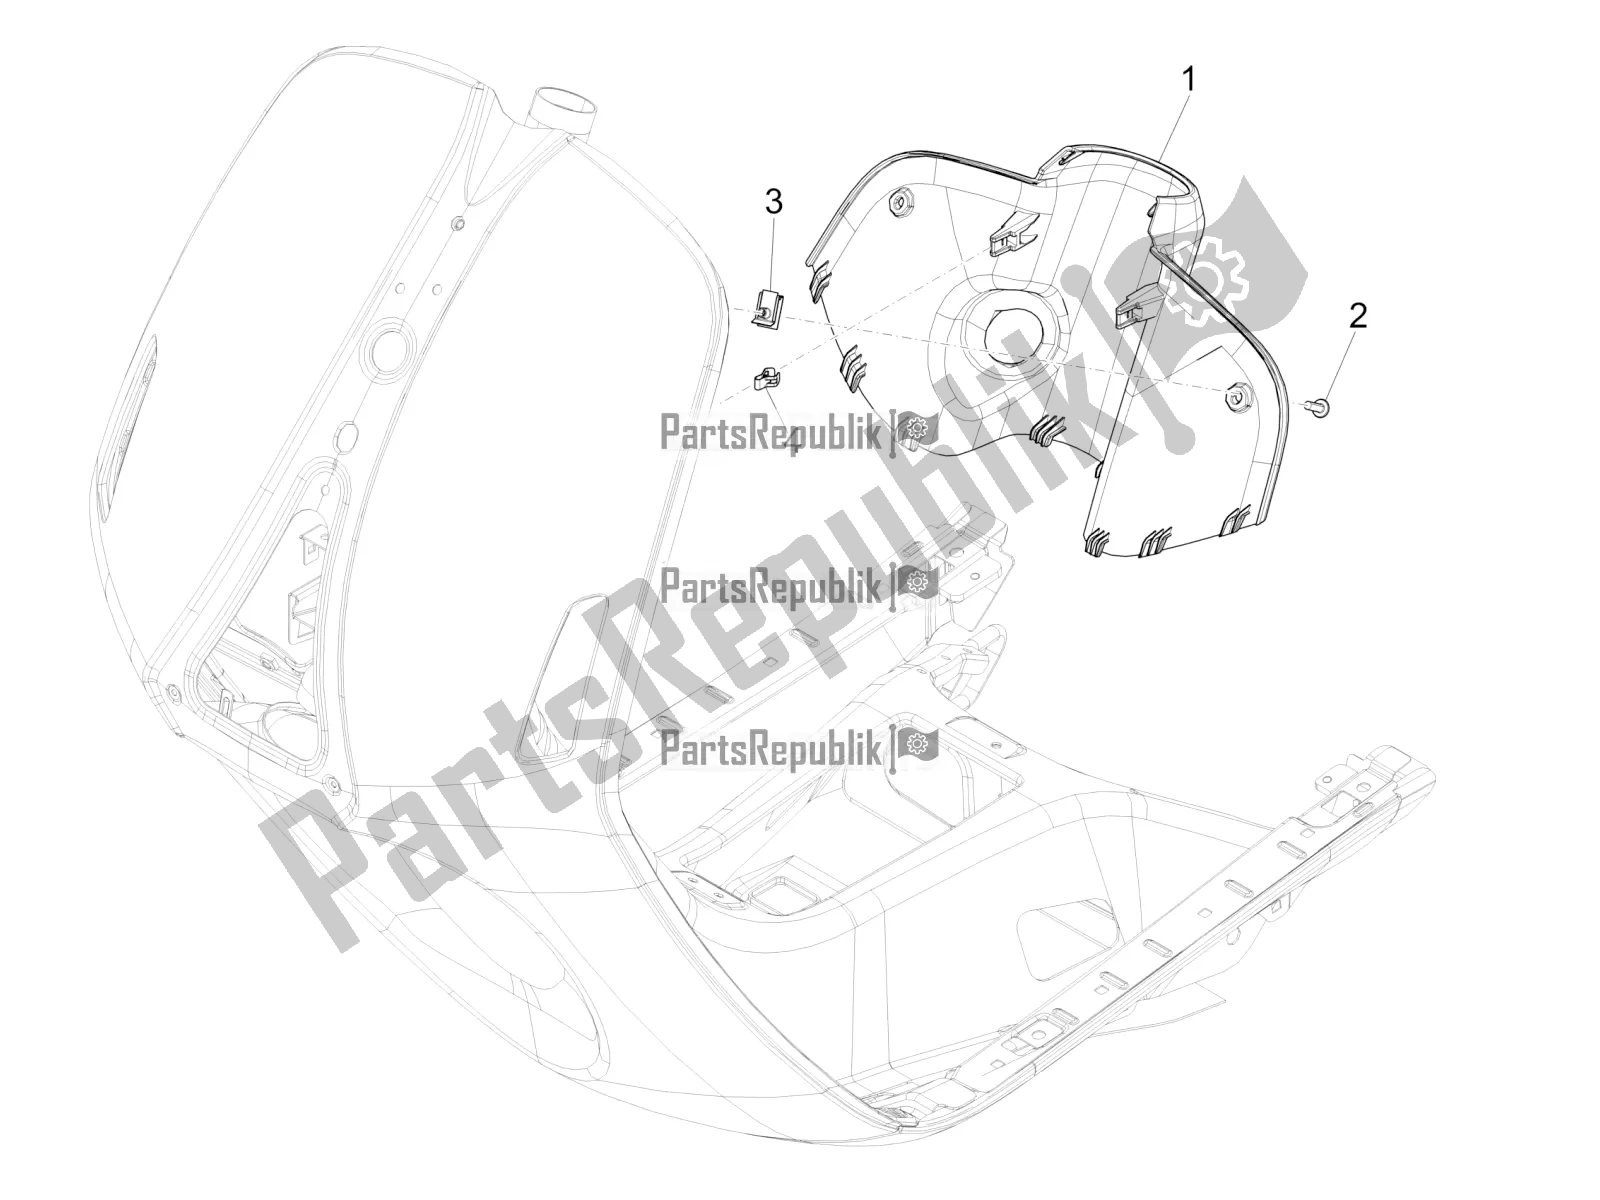 All parts for the Front Glove-box - Knee-guard Panel of the Vespa 946 125 4T 3V ABS-Armani 2017